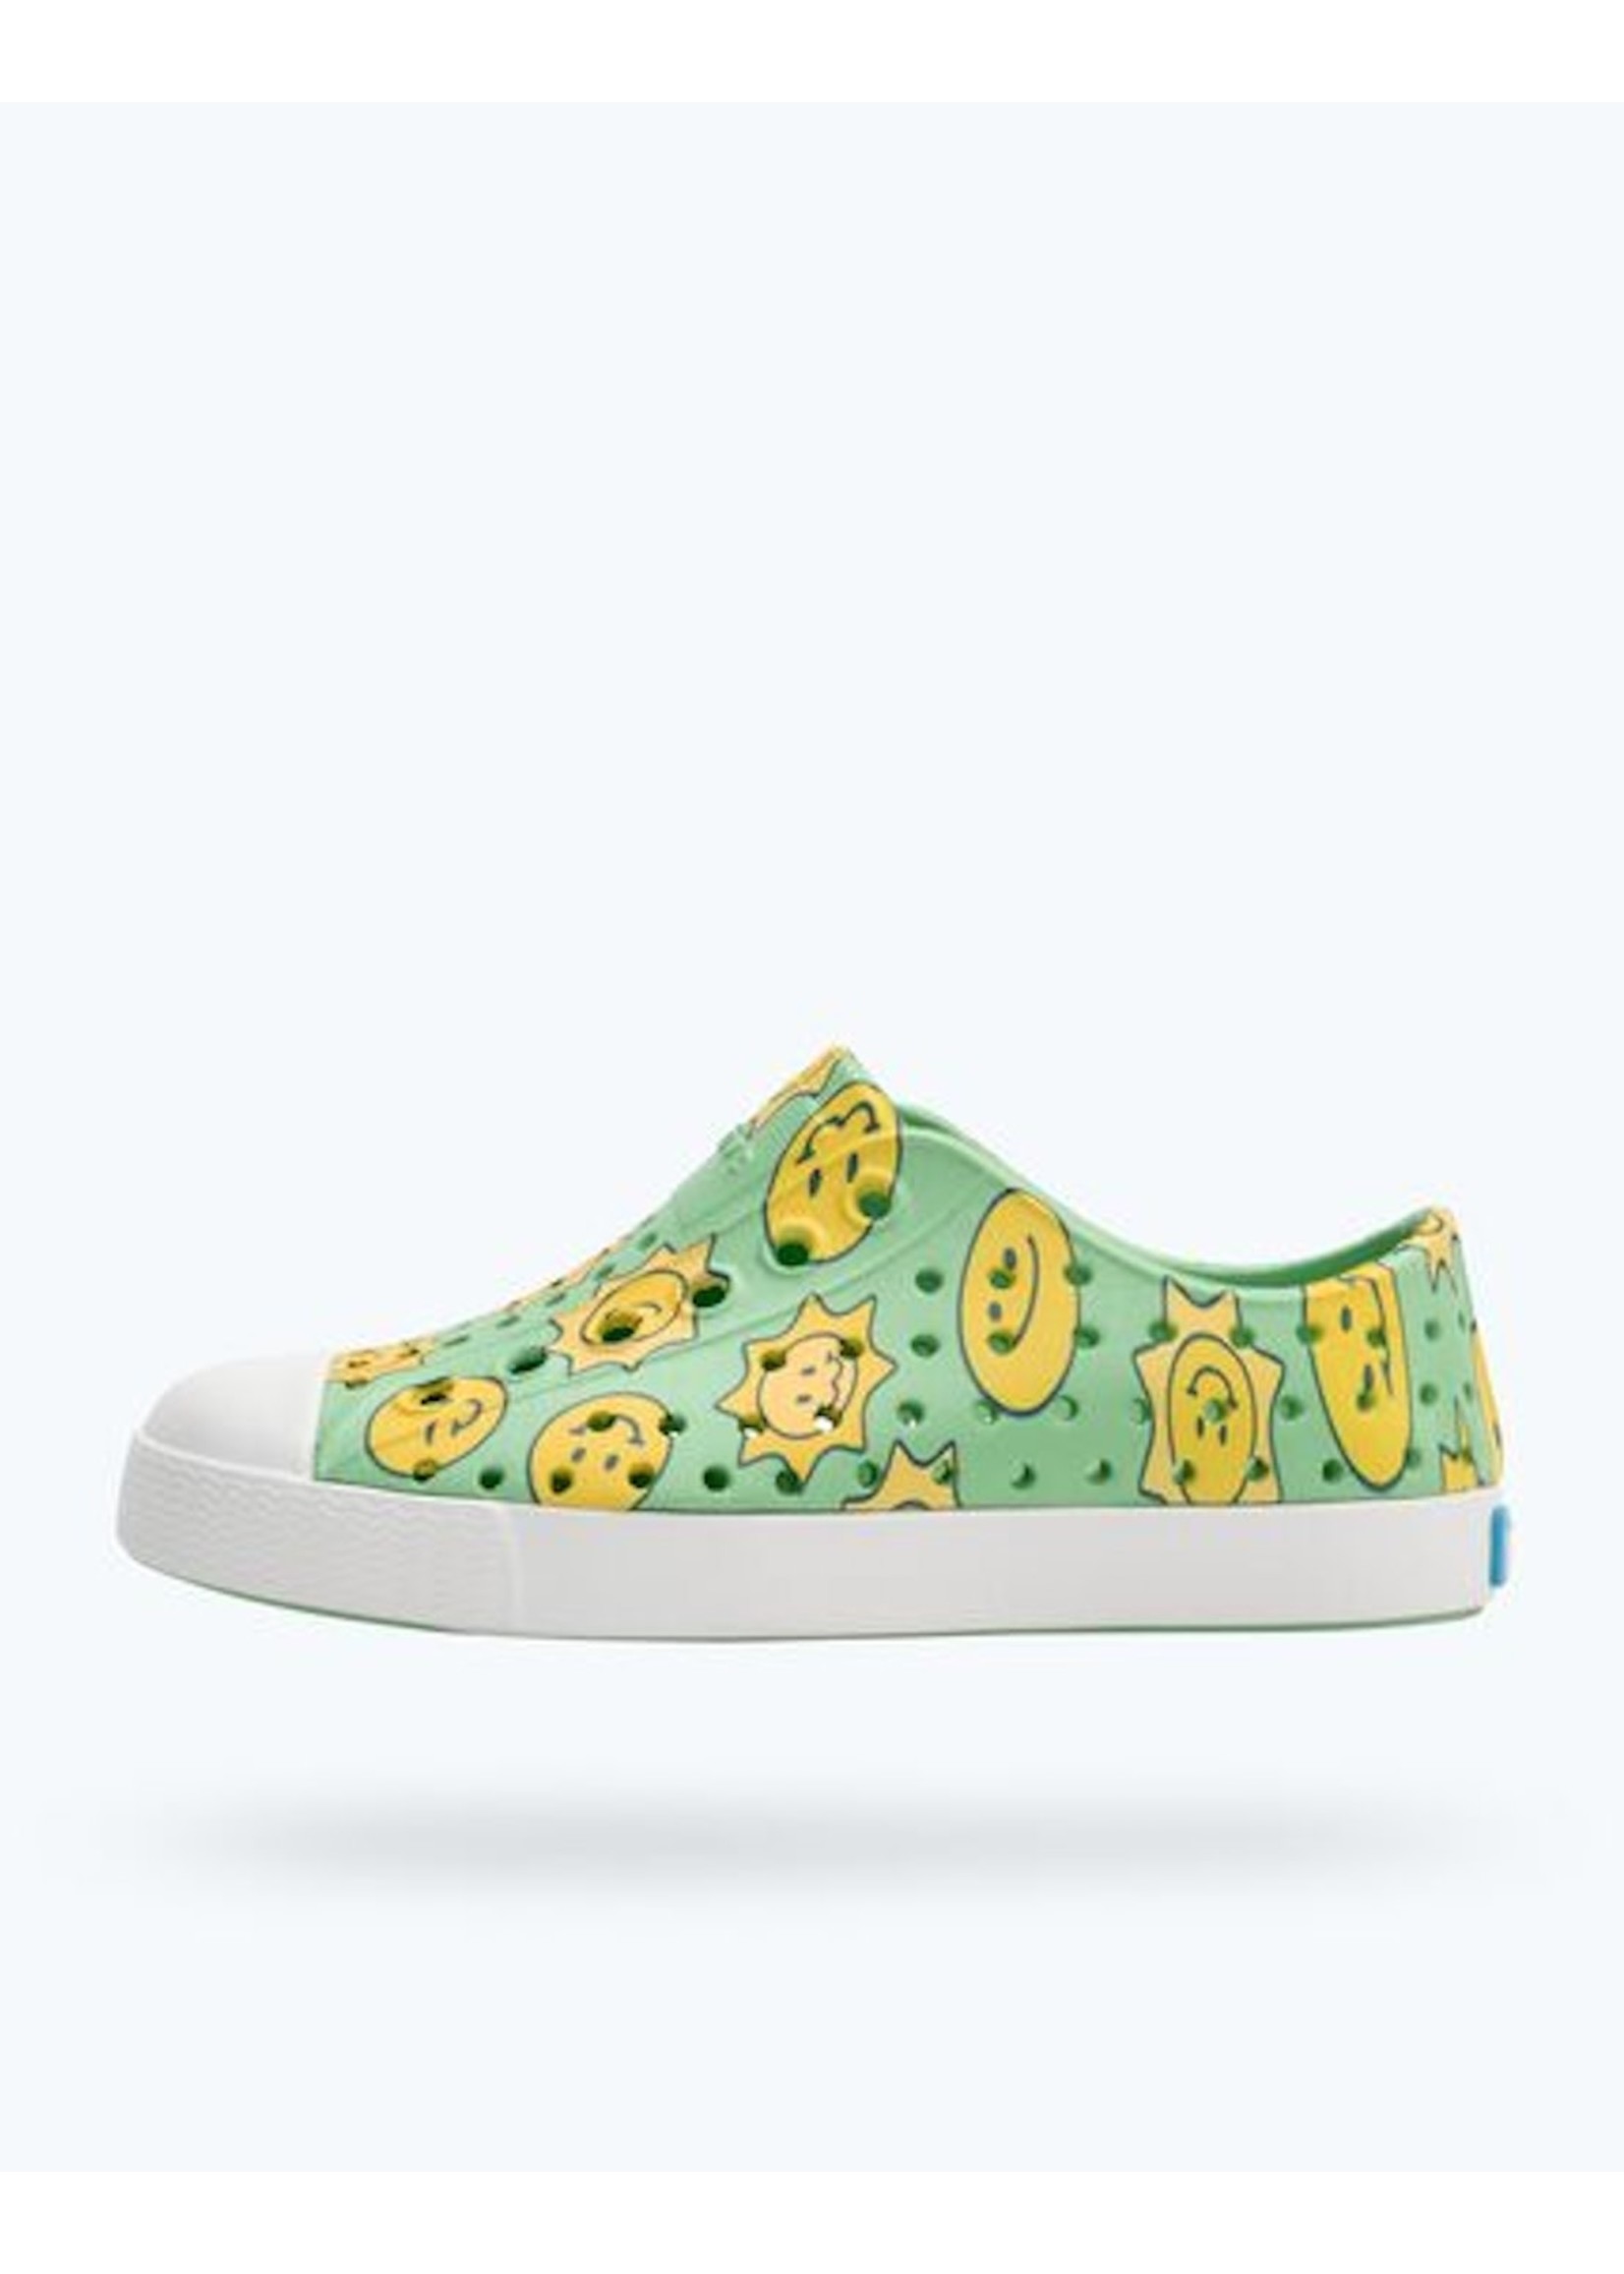 Native Shoes Native Shoes, Jefferson Sugarlite™ Print Youth / Junior Candy Green/ Shell White/ Raincoat Sunsmile